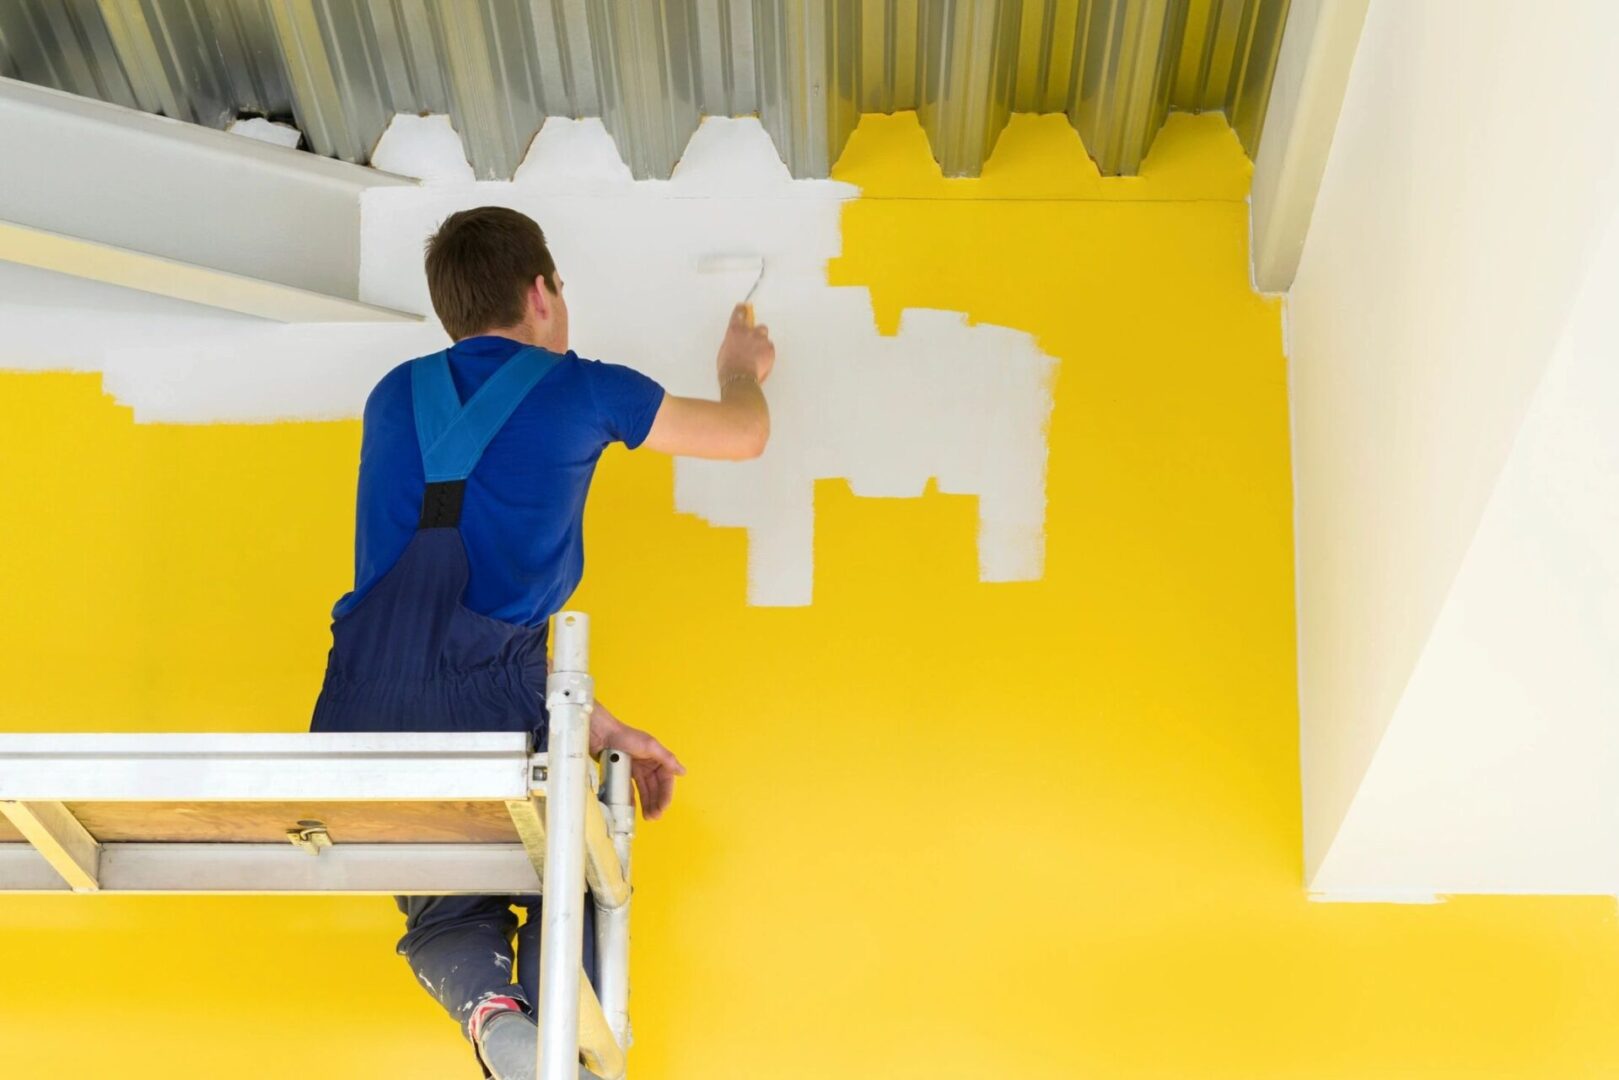 A man painting the wall of a room.